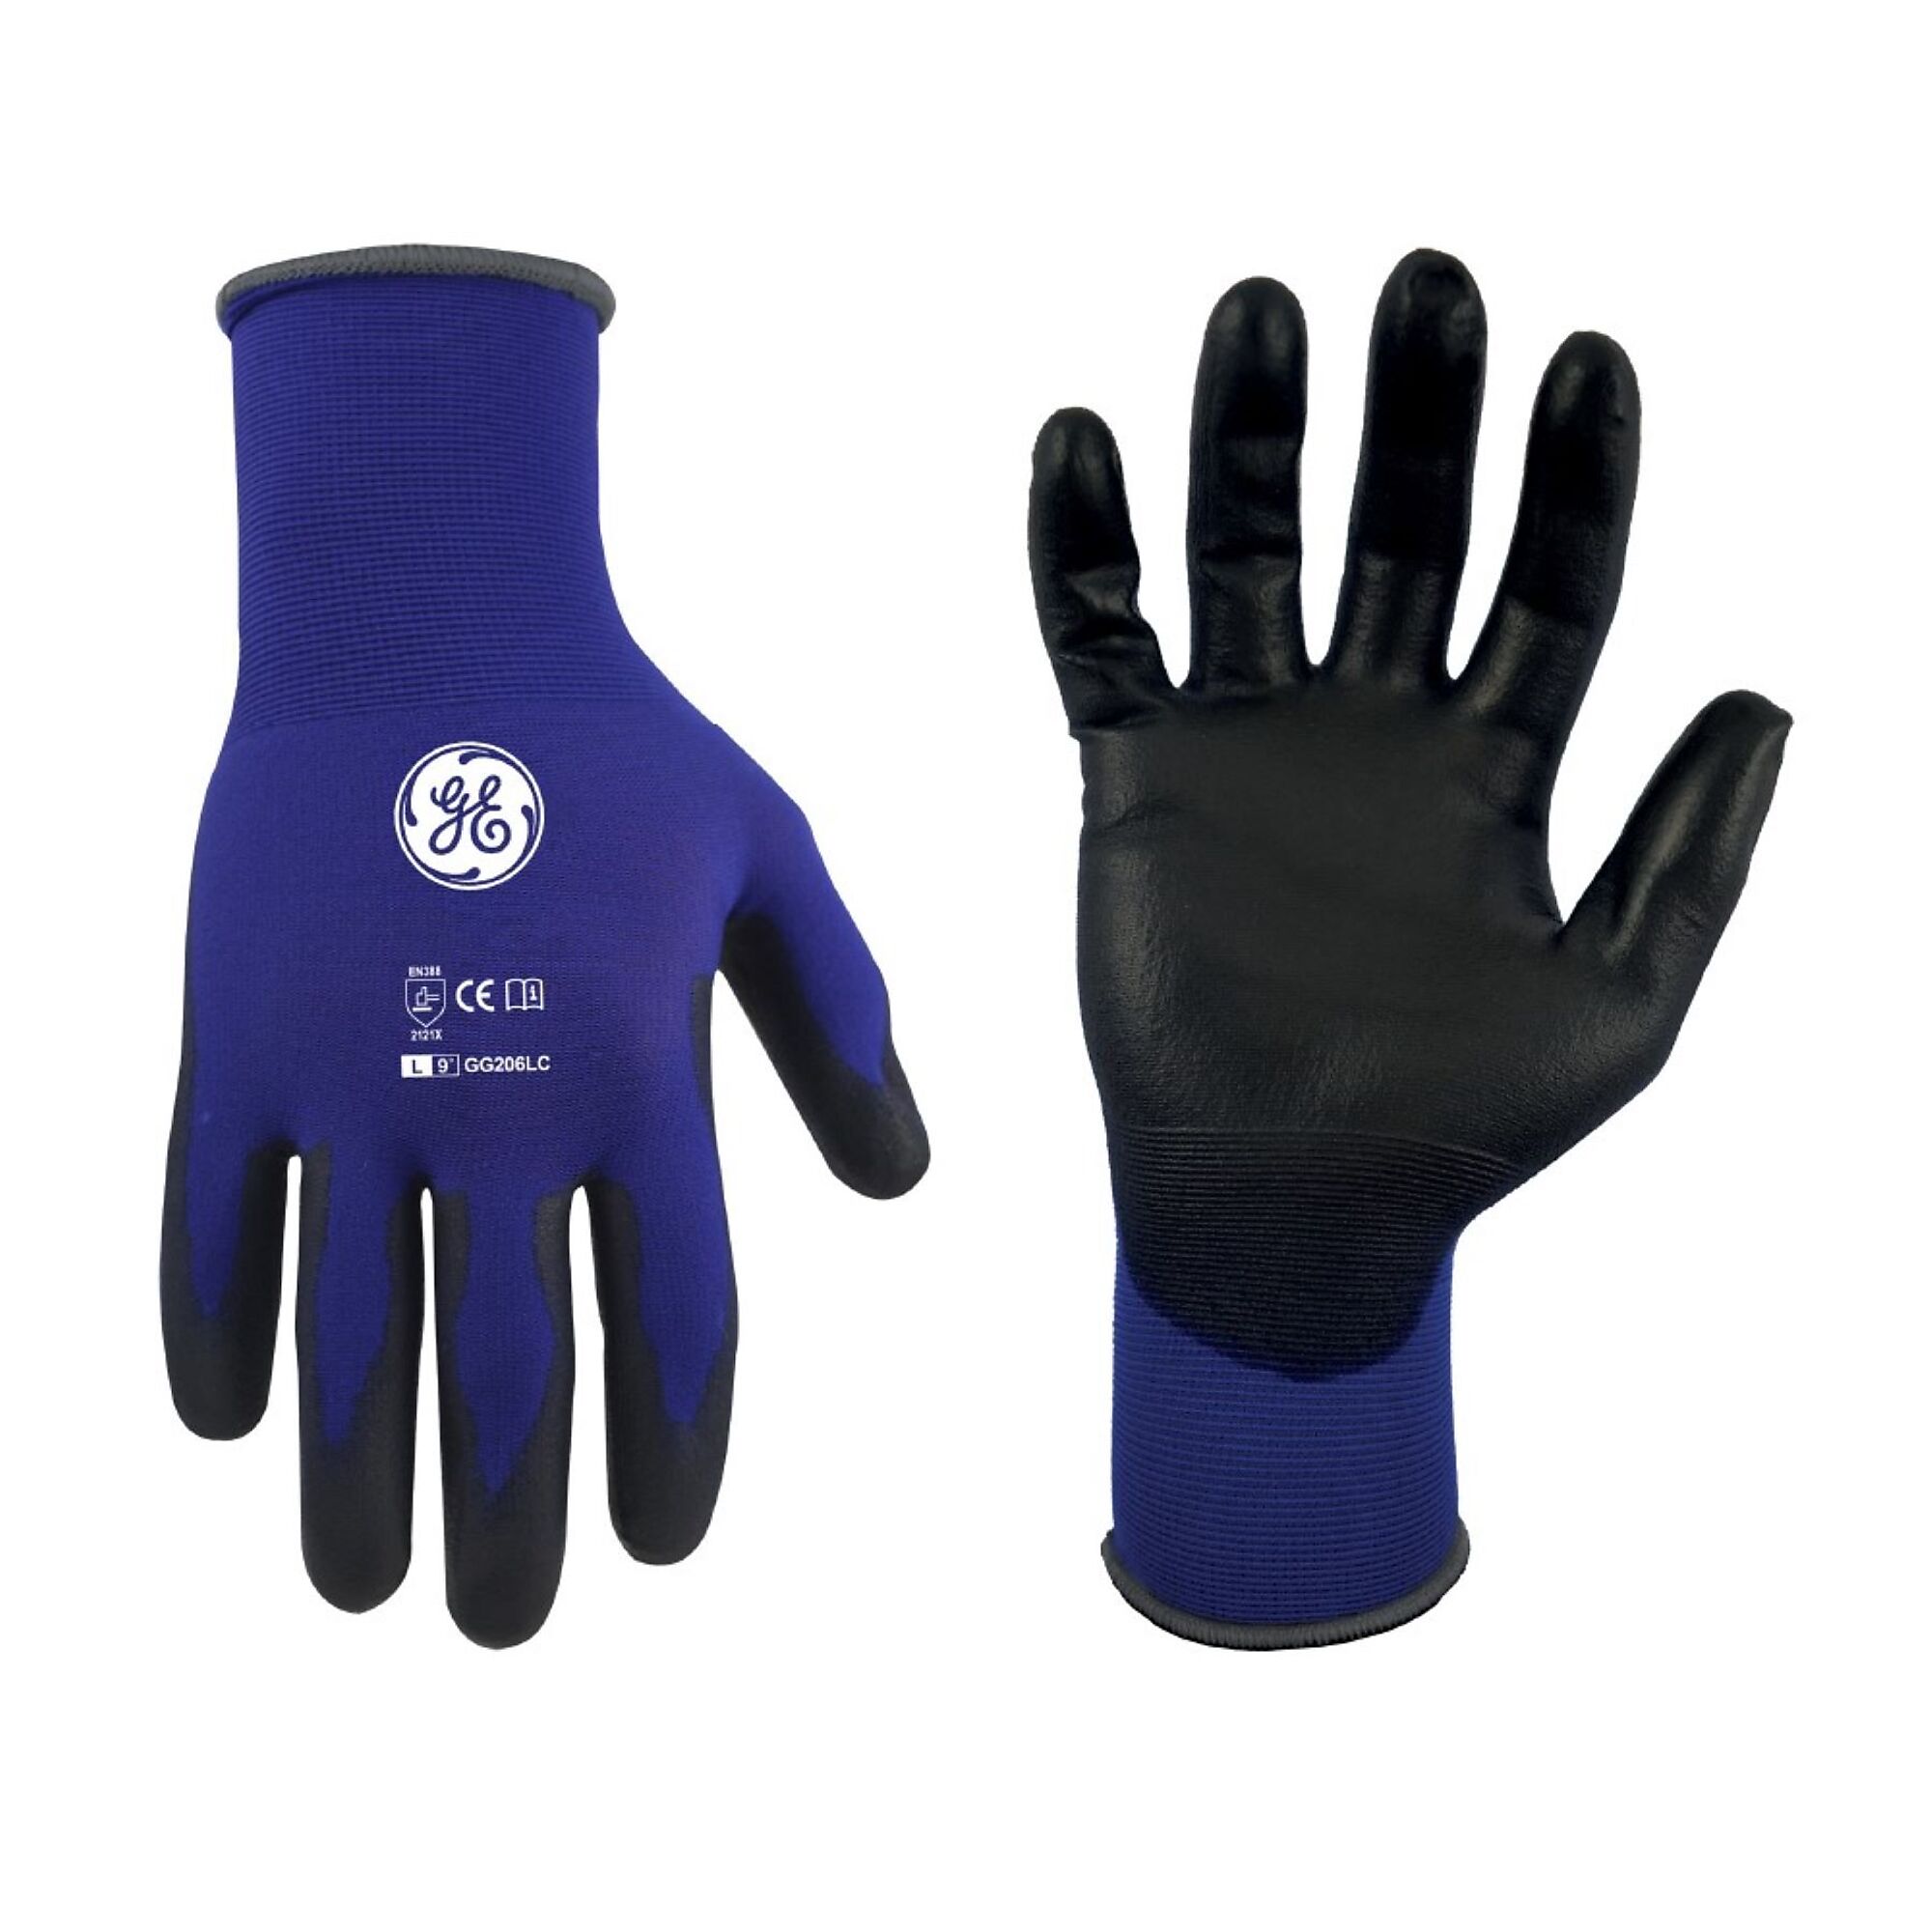 General Electric, Unisex Dipped Gloves Black/Blue L 12 pair, Size L, Included (qty.) 12, Model GG206L